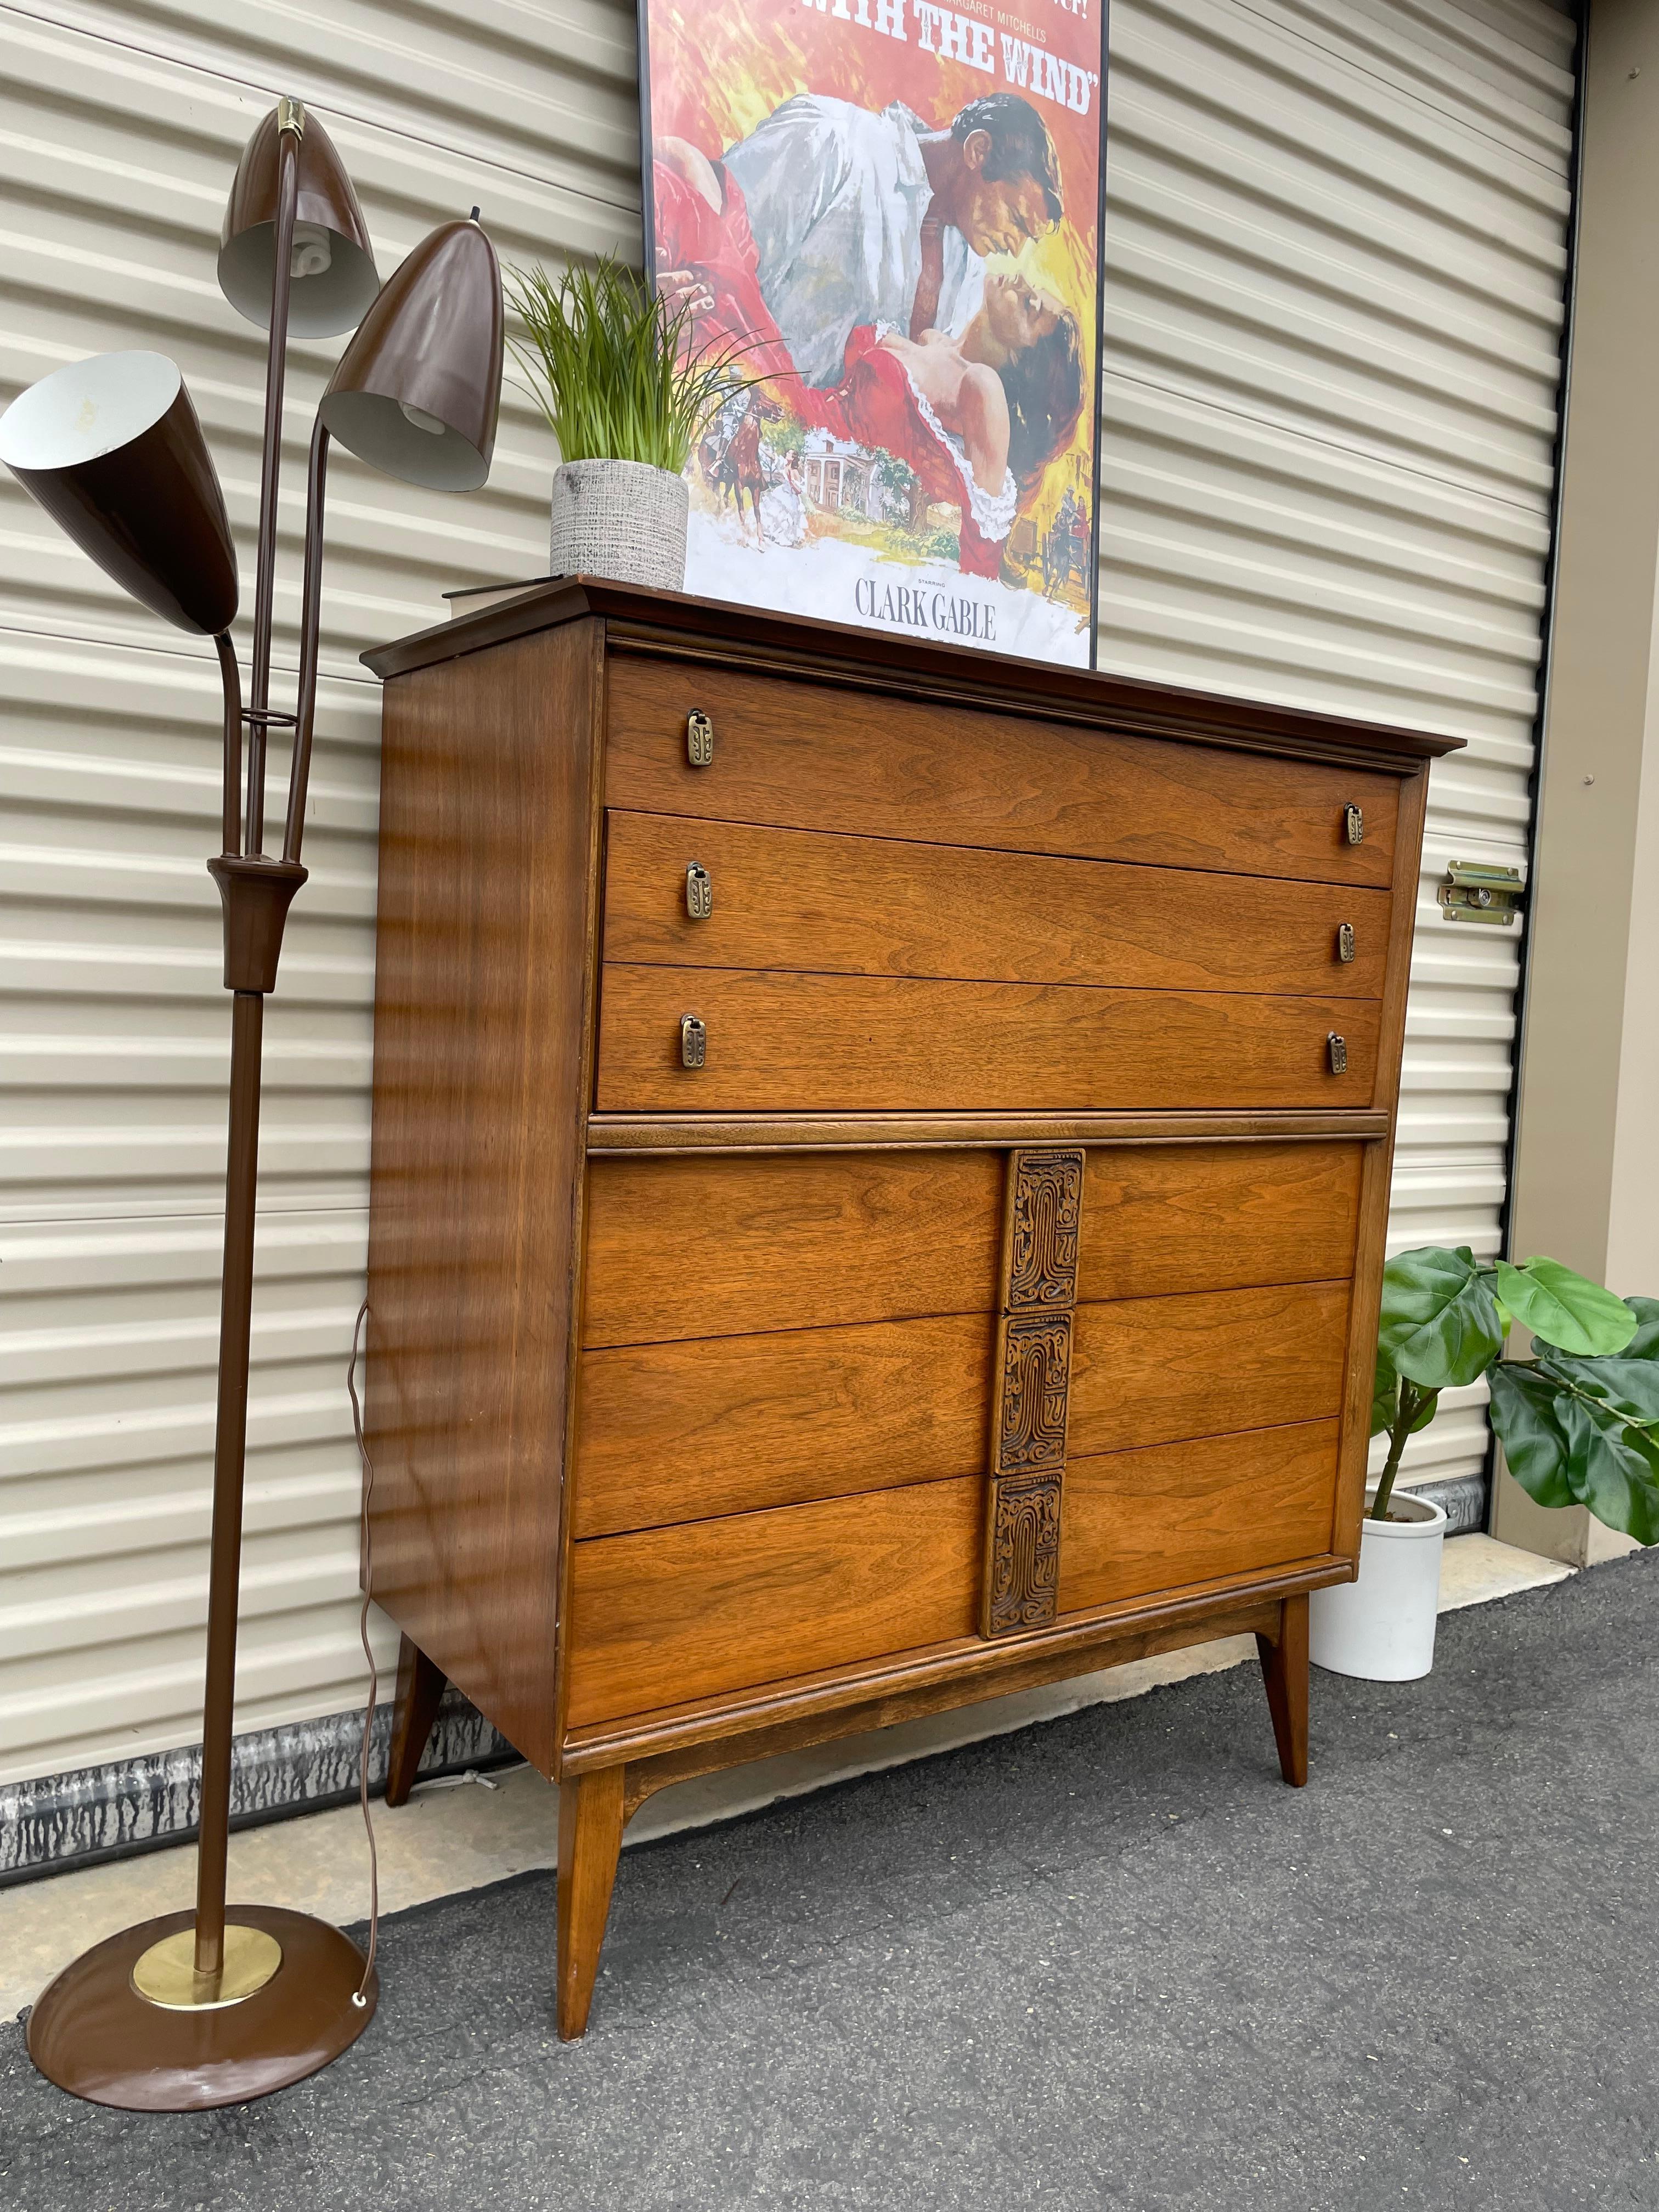 Beautiful midcentury Bassett dresser. Smooth sliding drawers and a gorgeous design on the pull handles.